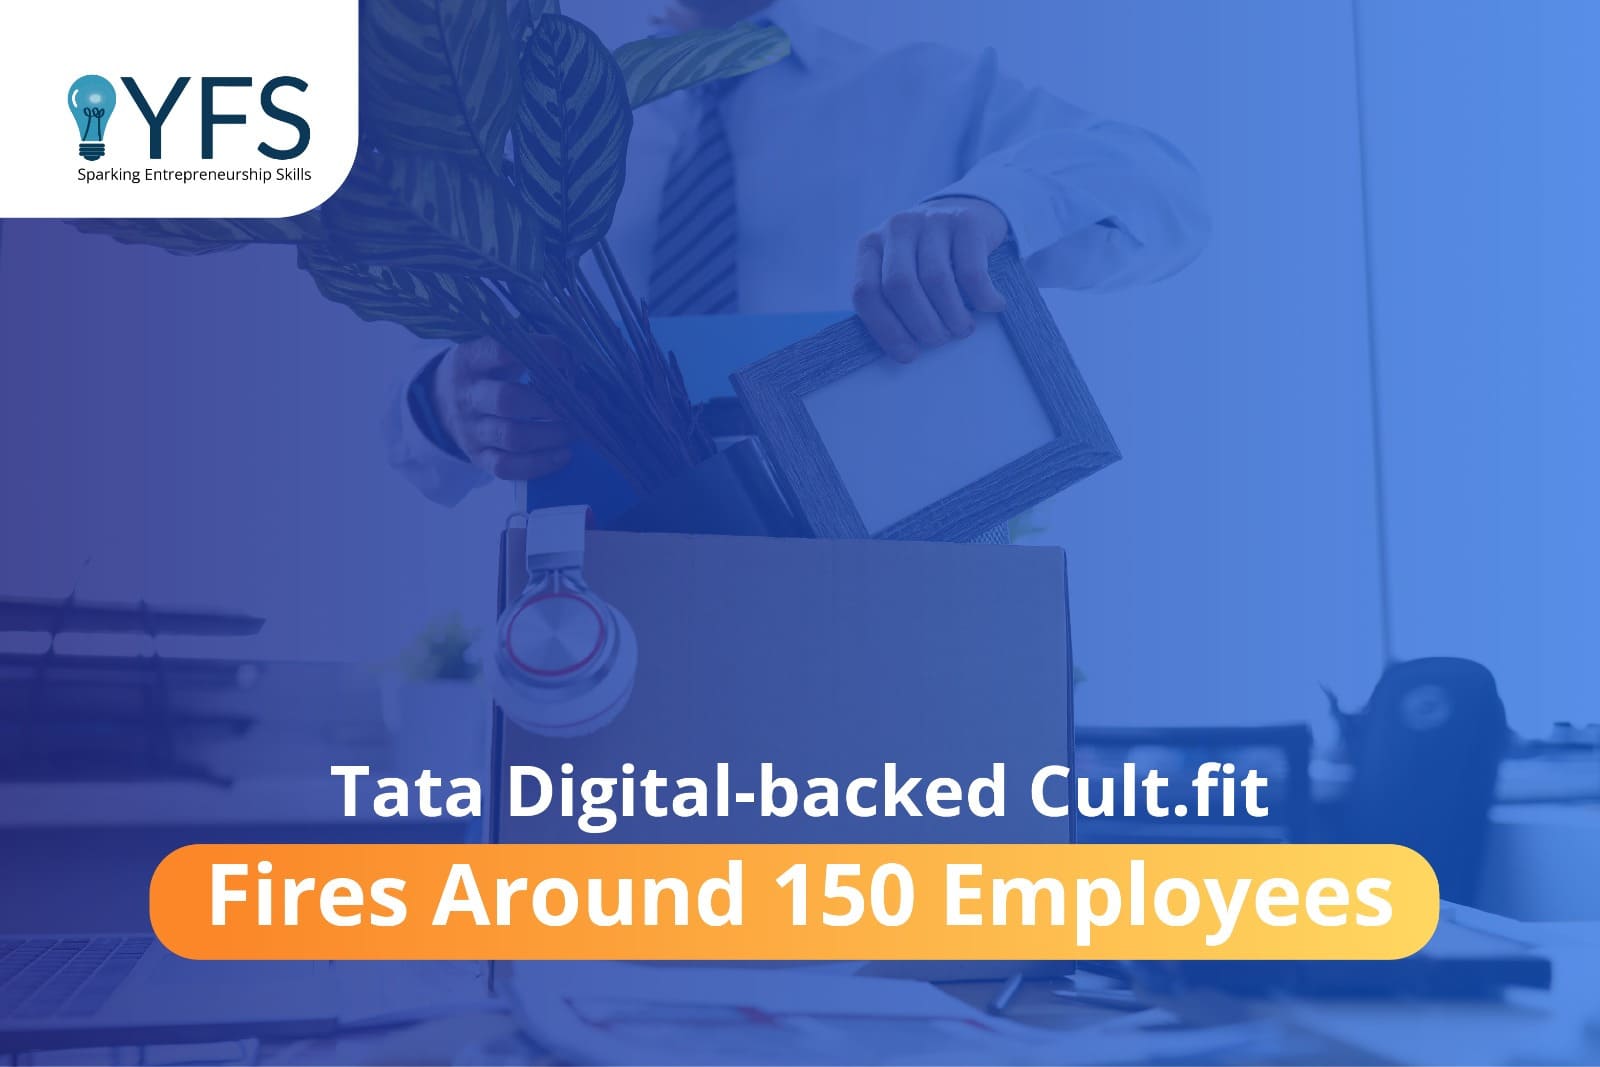 Tata Digital-backed Cult.fit Fires Around 150 Employees